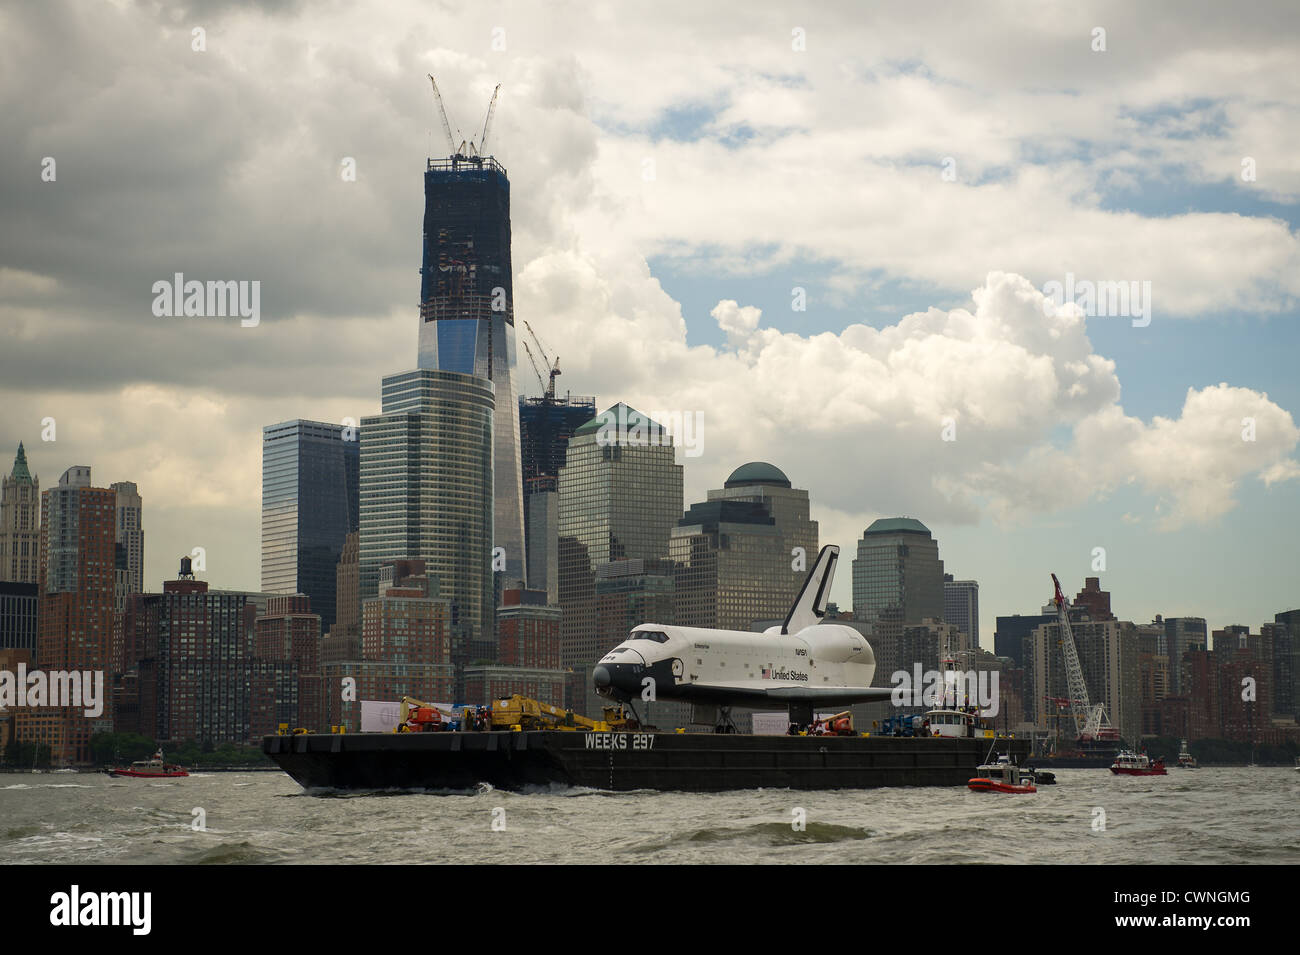 The space shuttle Enterprise is towed by barge up the Hudson River in New York with the World Trade Center's Freedom Tower in the background June 6, 2012 while on it's way to the Intrepid Sea, Air and Space Museum. Stock Photo